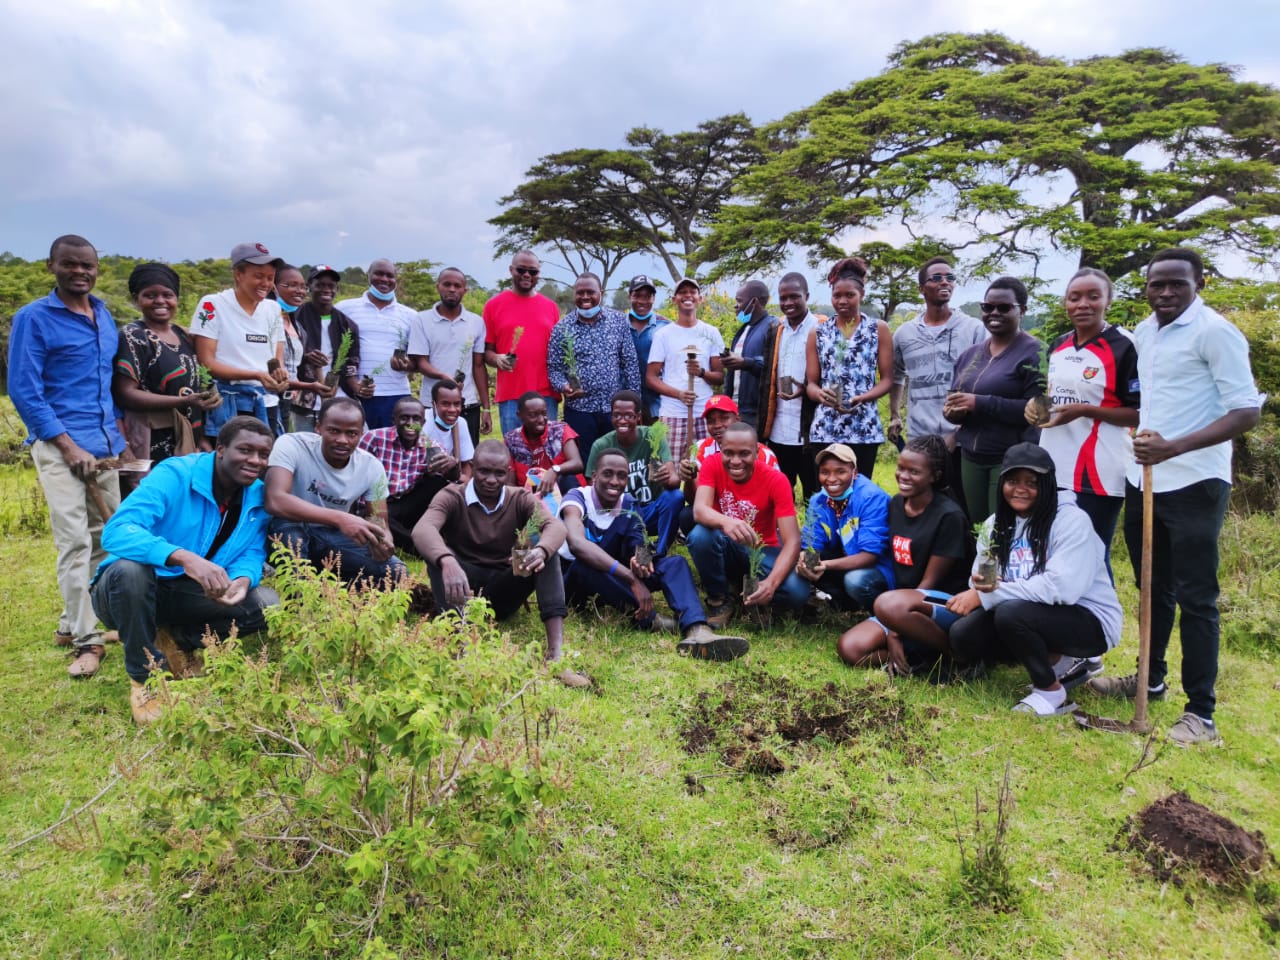 Egerton University staff and students participate in a tree planting event at Main Campus in Njoro